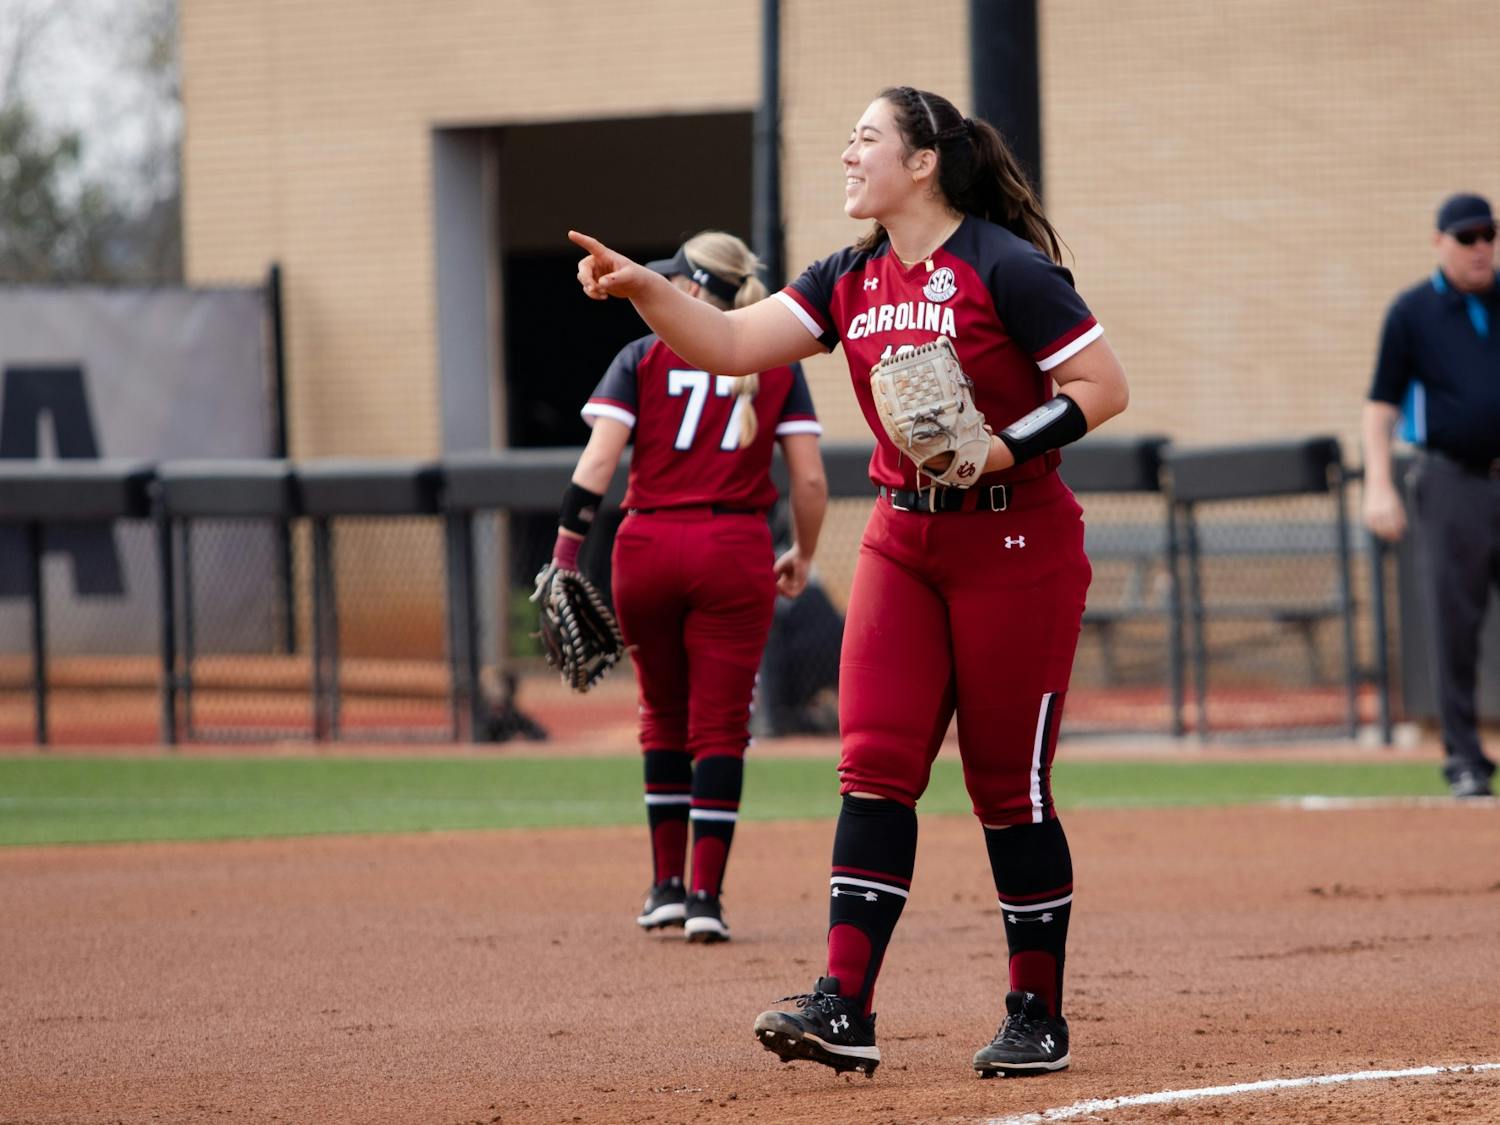 Graduate pitcher Kelsey Oh congratulates her teammate on a successful play during a game against Lipscomb on Saturday, Feb. 12, 2022 in Columbia, SC.